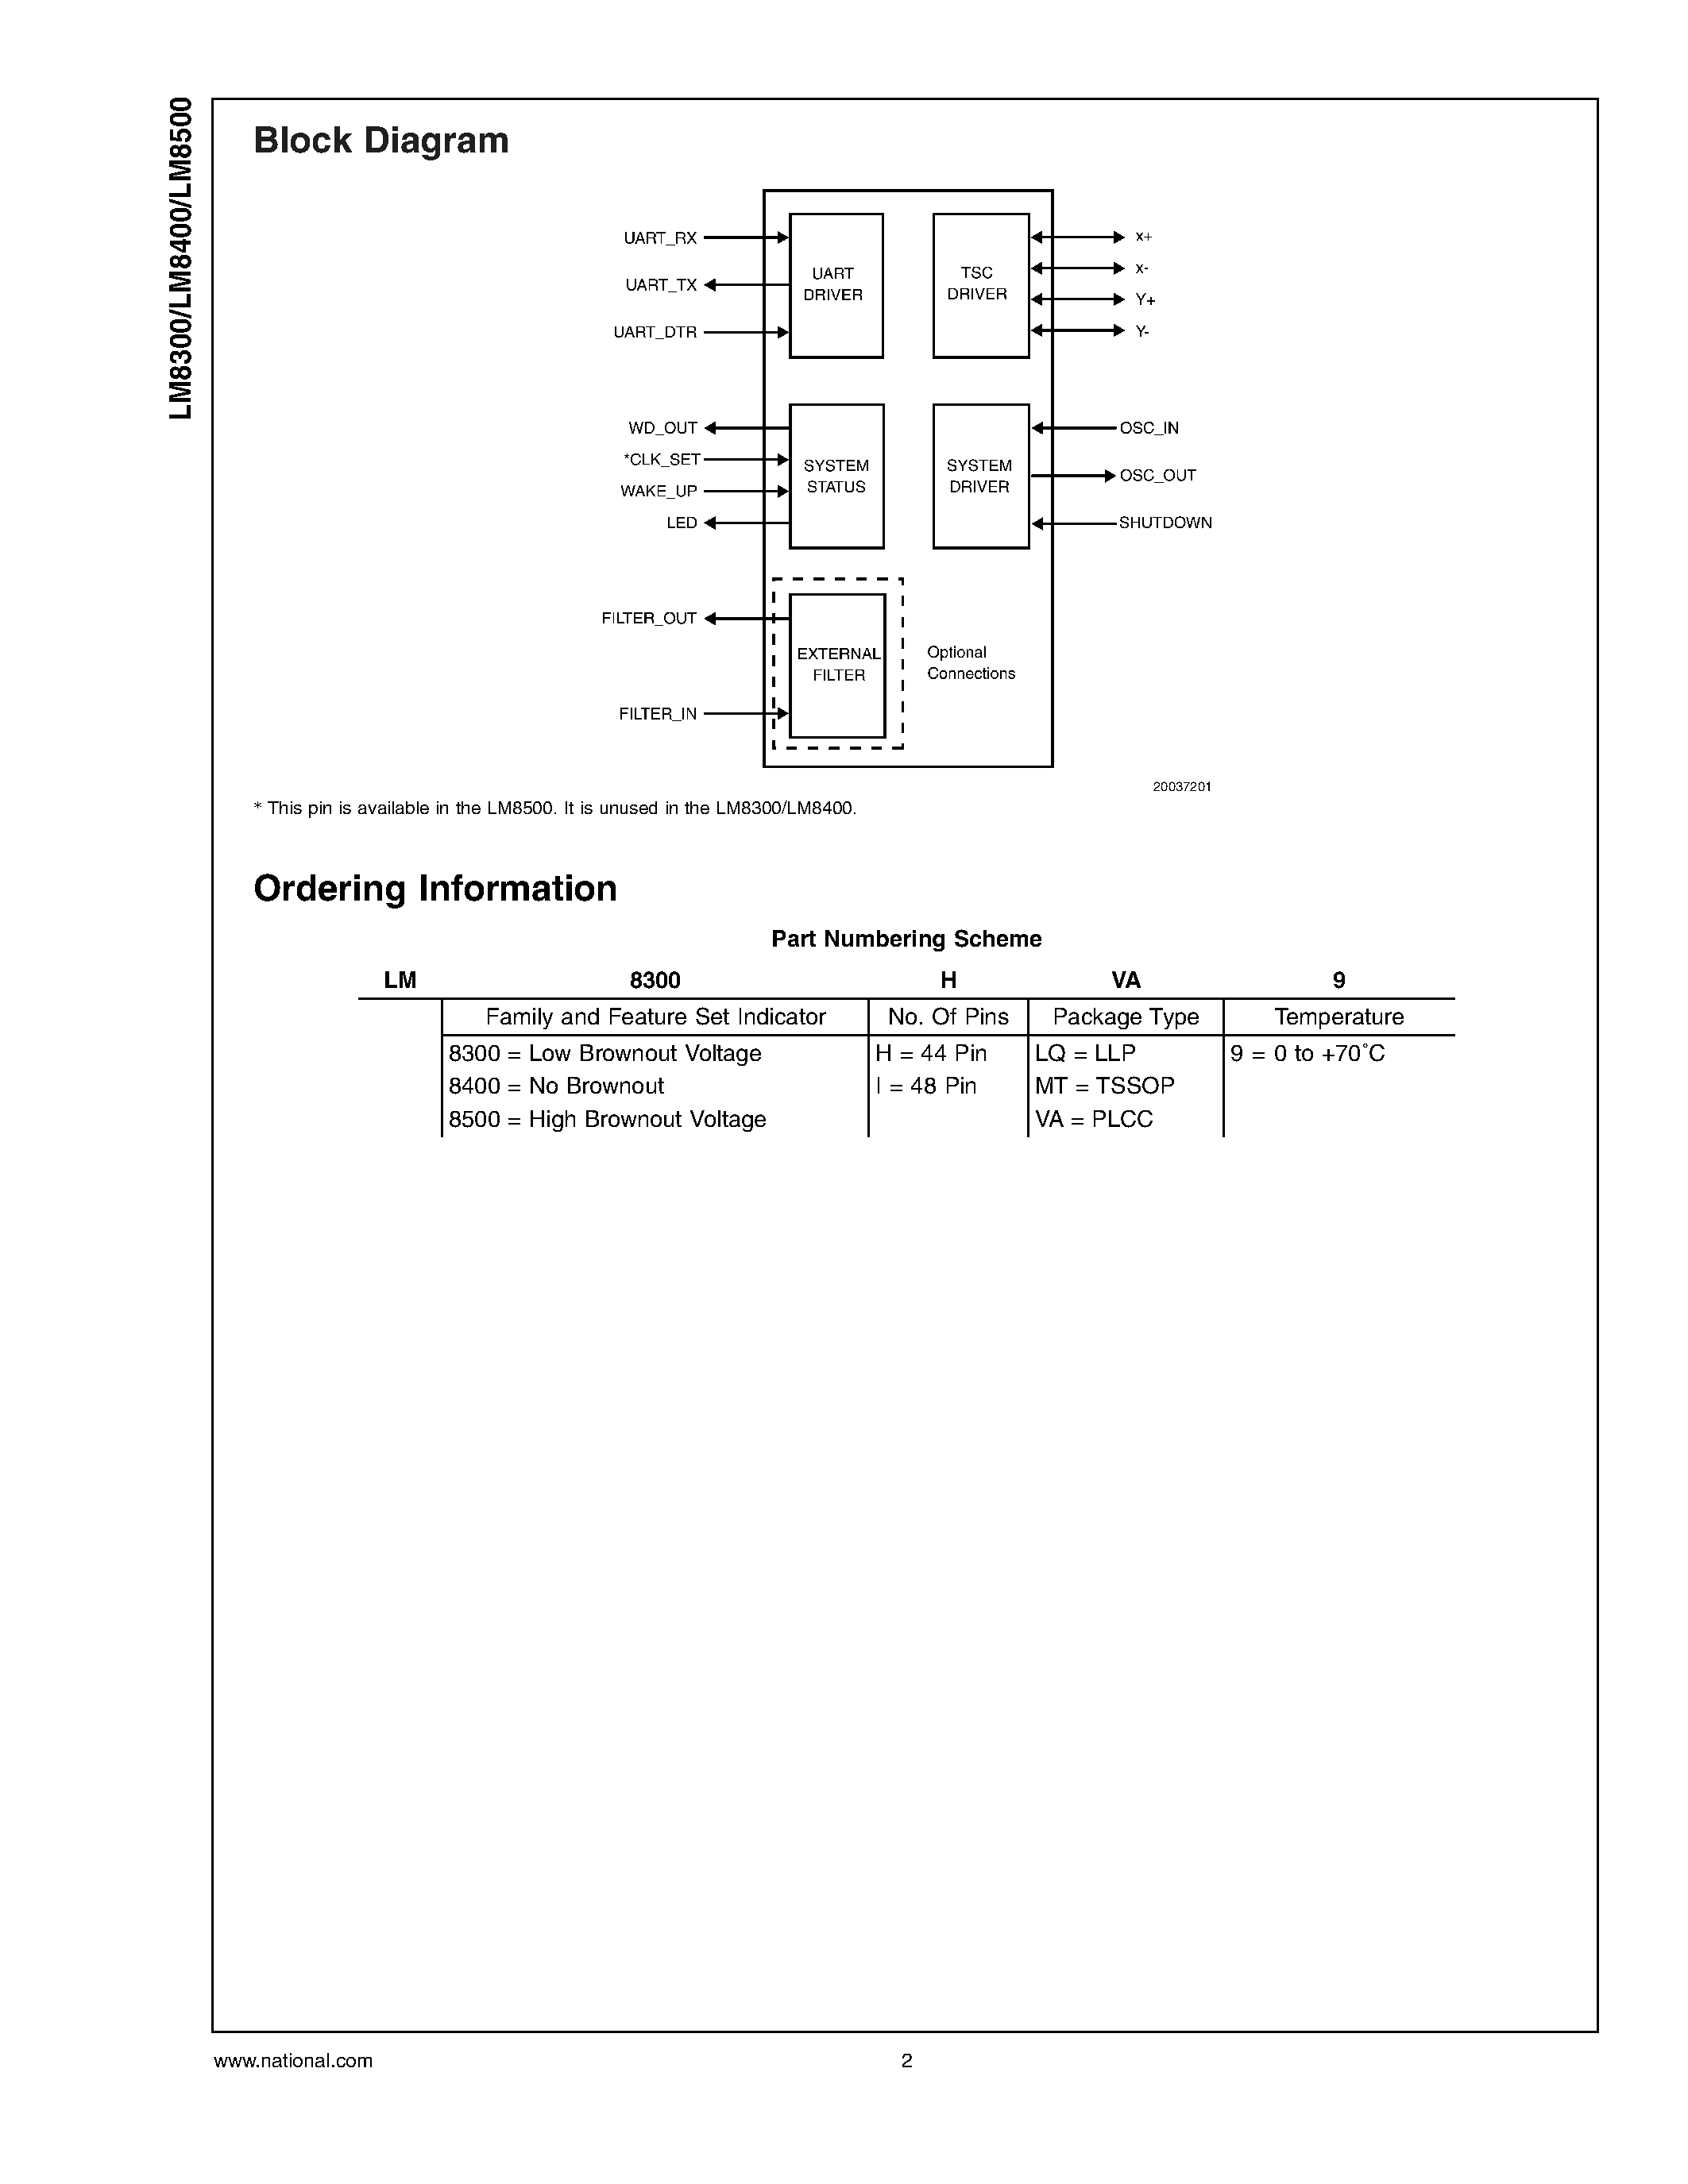 Datasheet LM8500 - Four Wire Resistive Touchscreen Controller with Brownout page 2